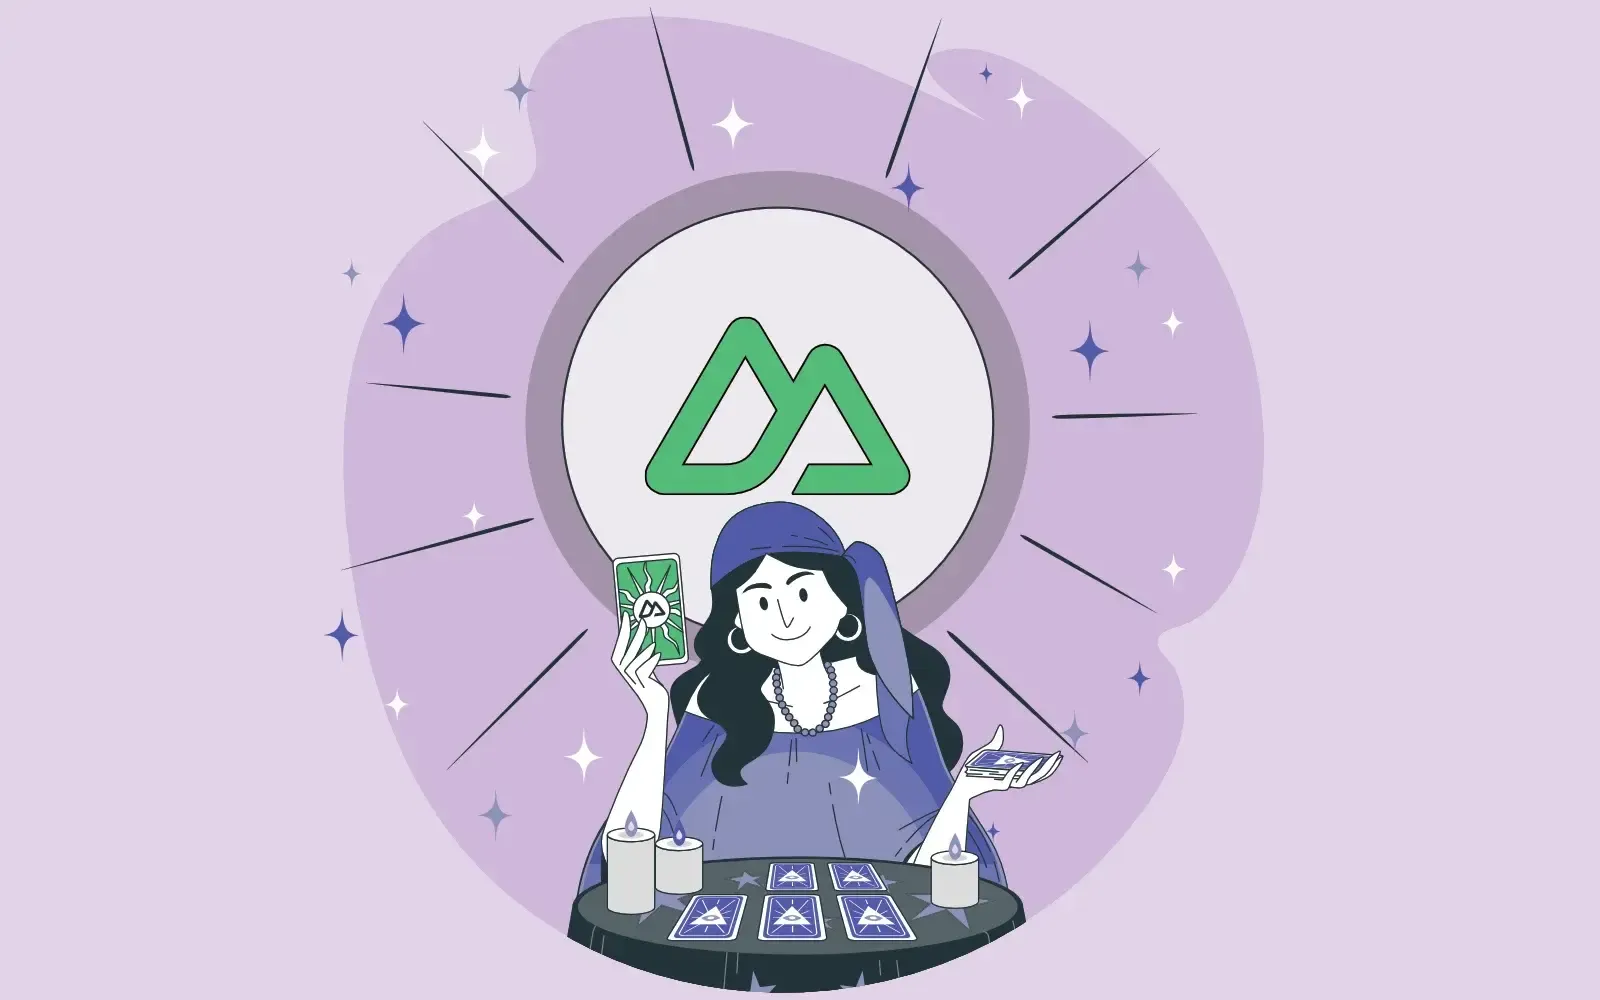 Line-art fortune teller holding a card with the Nuxt logo